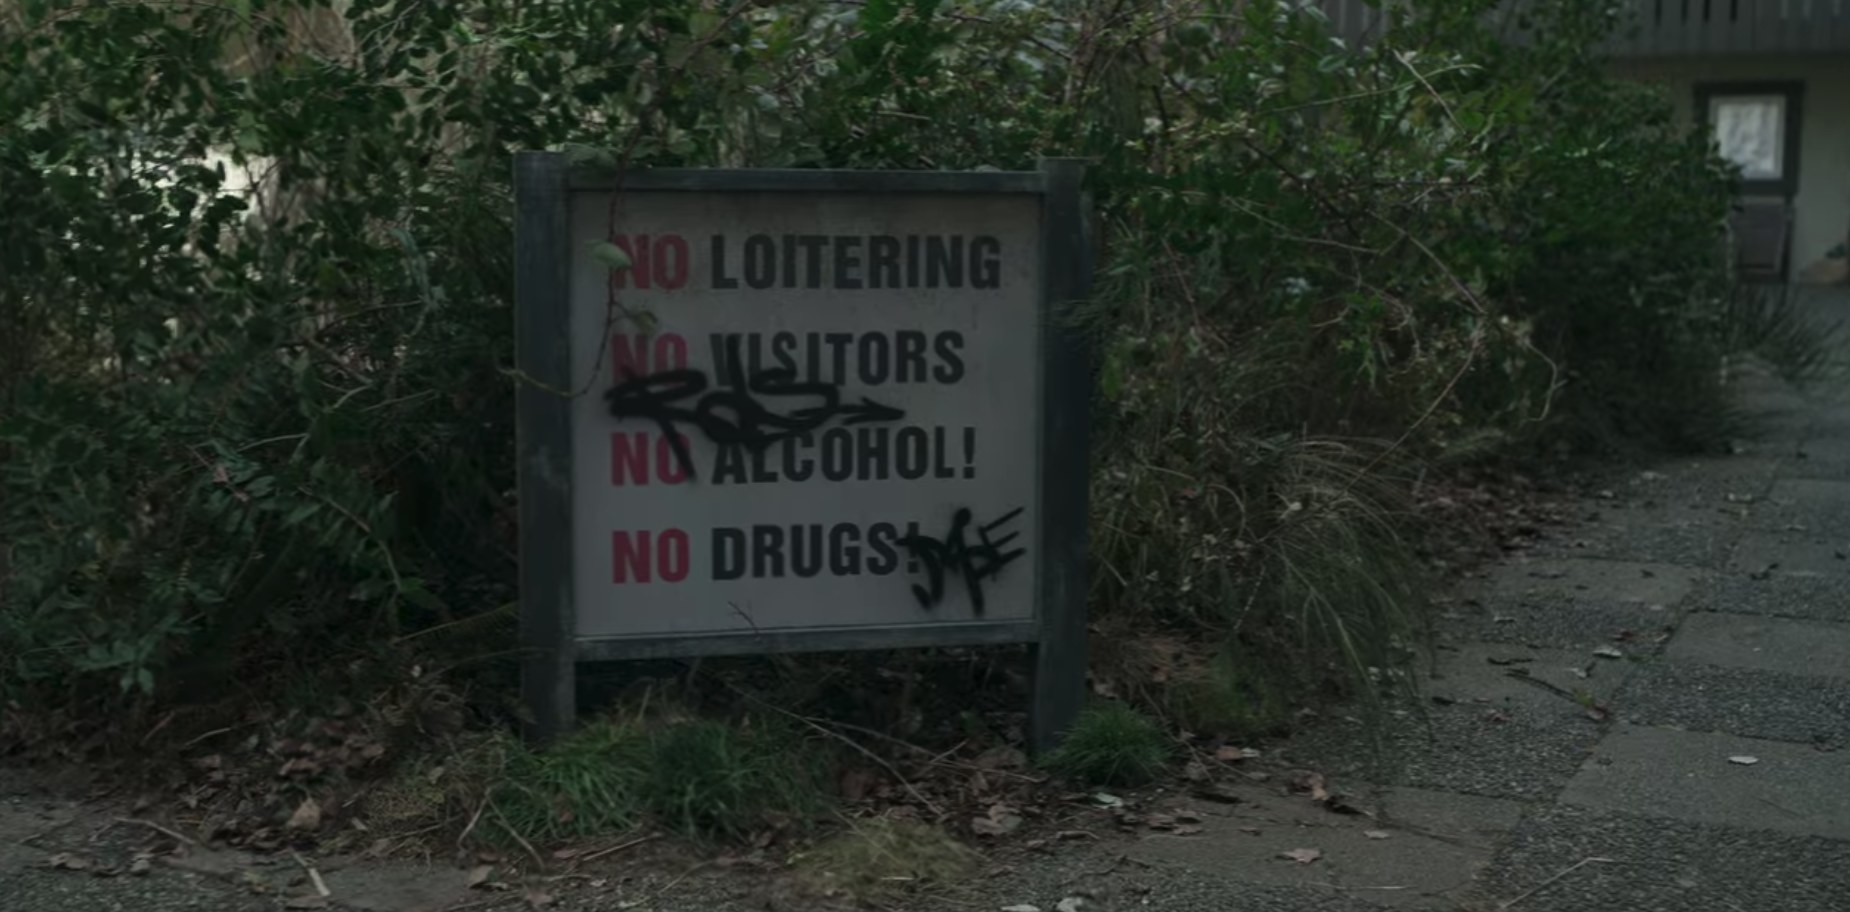 The sign outside Alex&#x27;s transitional housing says, &quot;No Loitering,&quot; &quot;No Visitors,&quot; &quot;No Alcohol!&quot; and &quot;No Drugs!&quot;